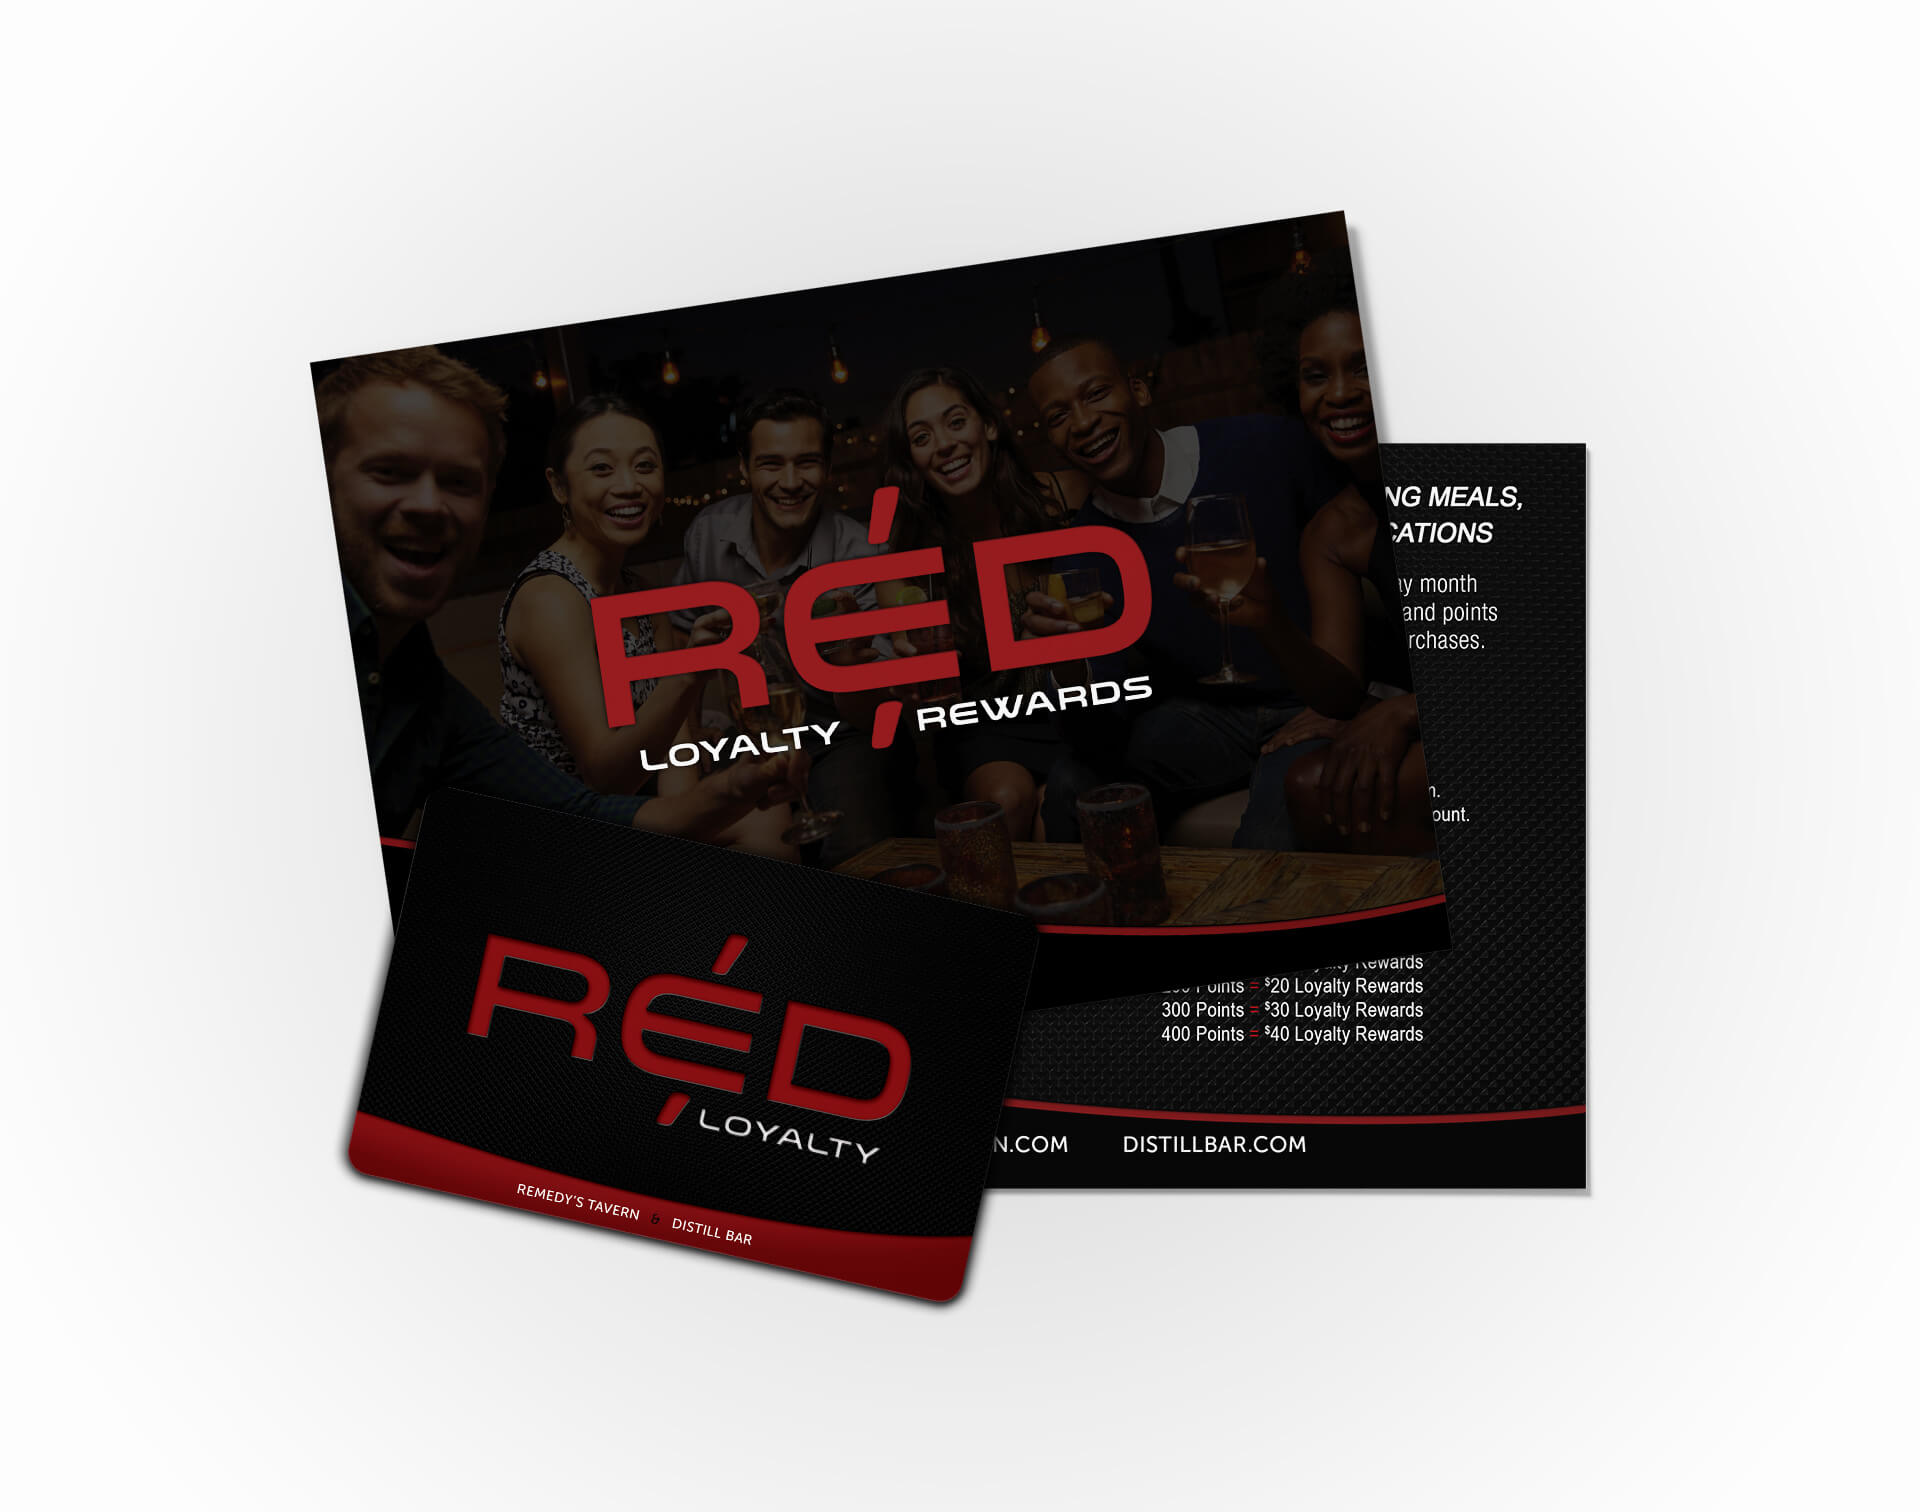 R&D Tavern Group marketing & advertising designed by The Visual Deli